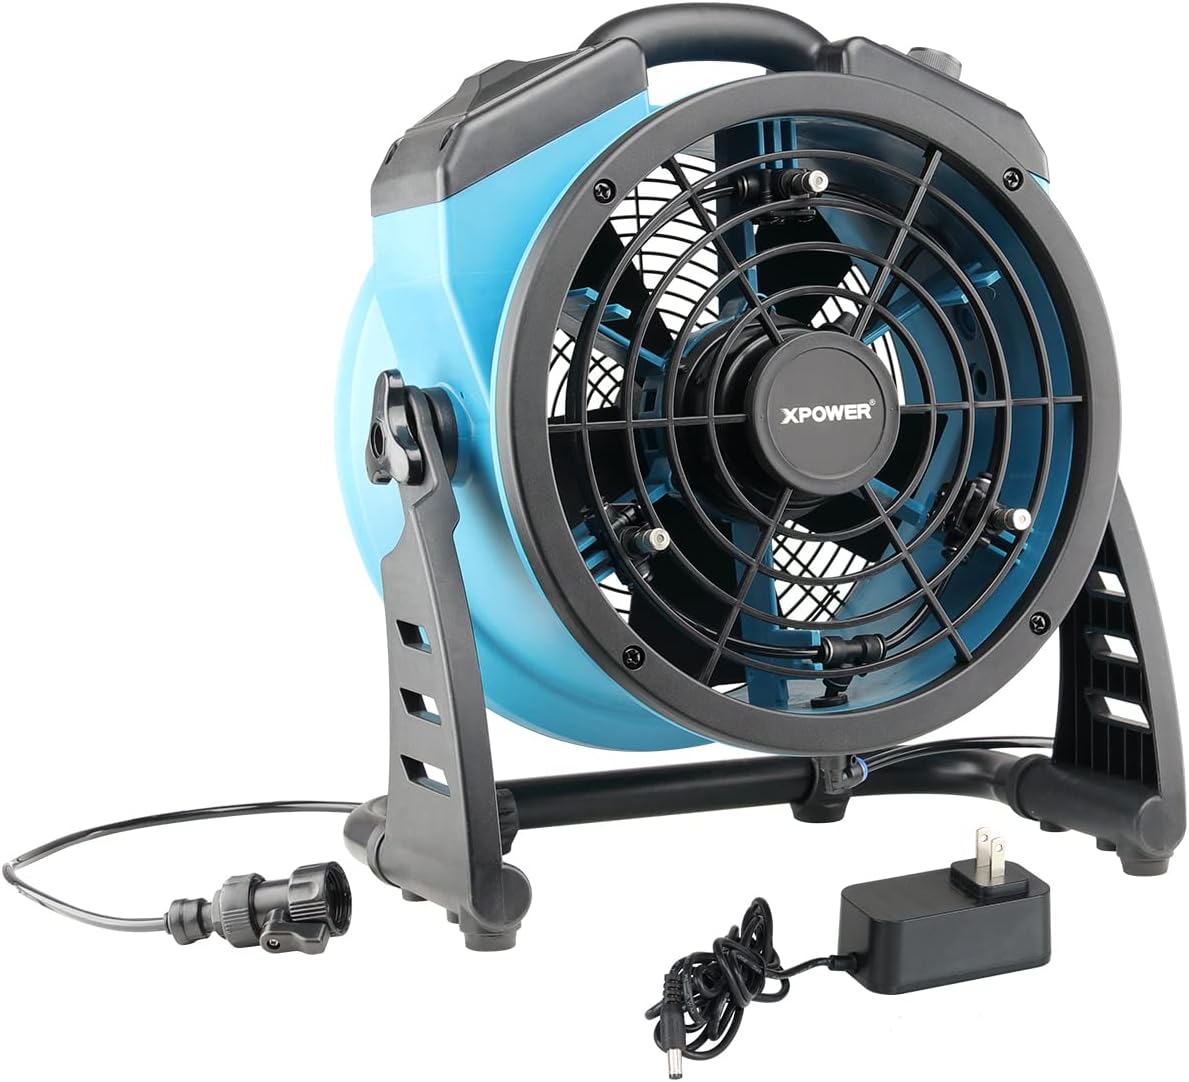 XPOWER Misting Fan Cooling Humidifier Carpet Blower Outdoor- FM-65B